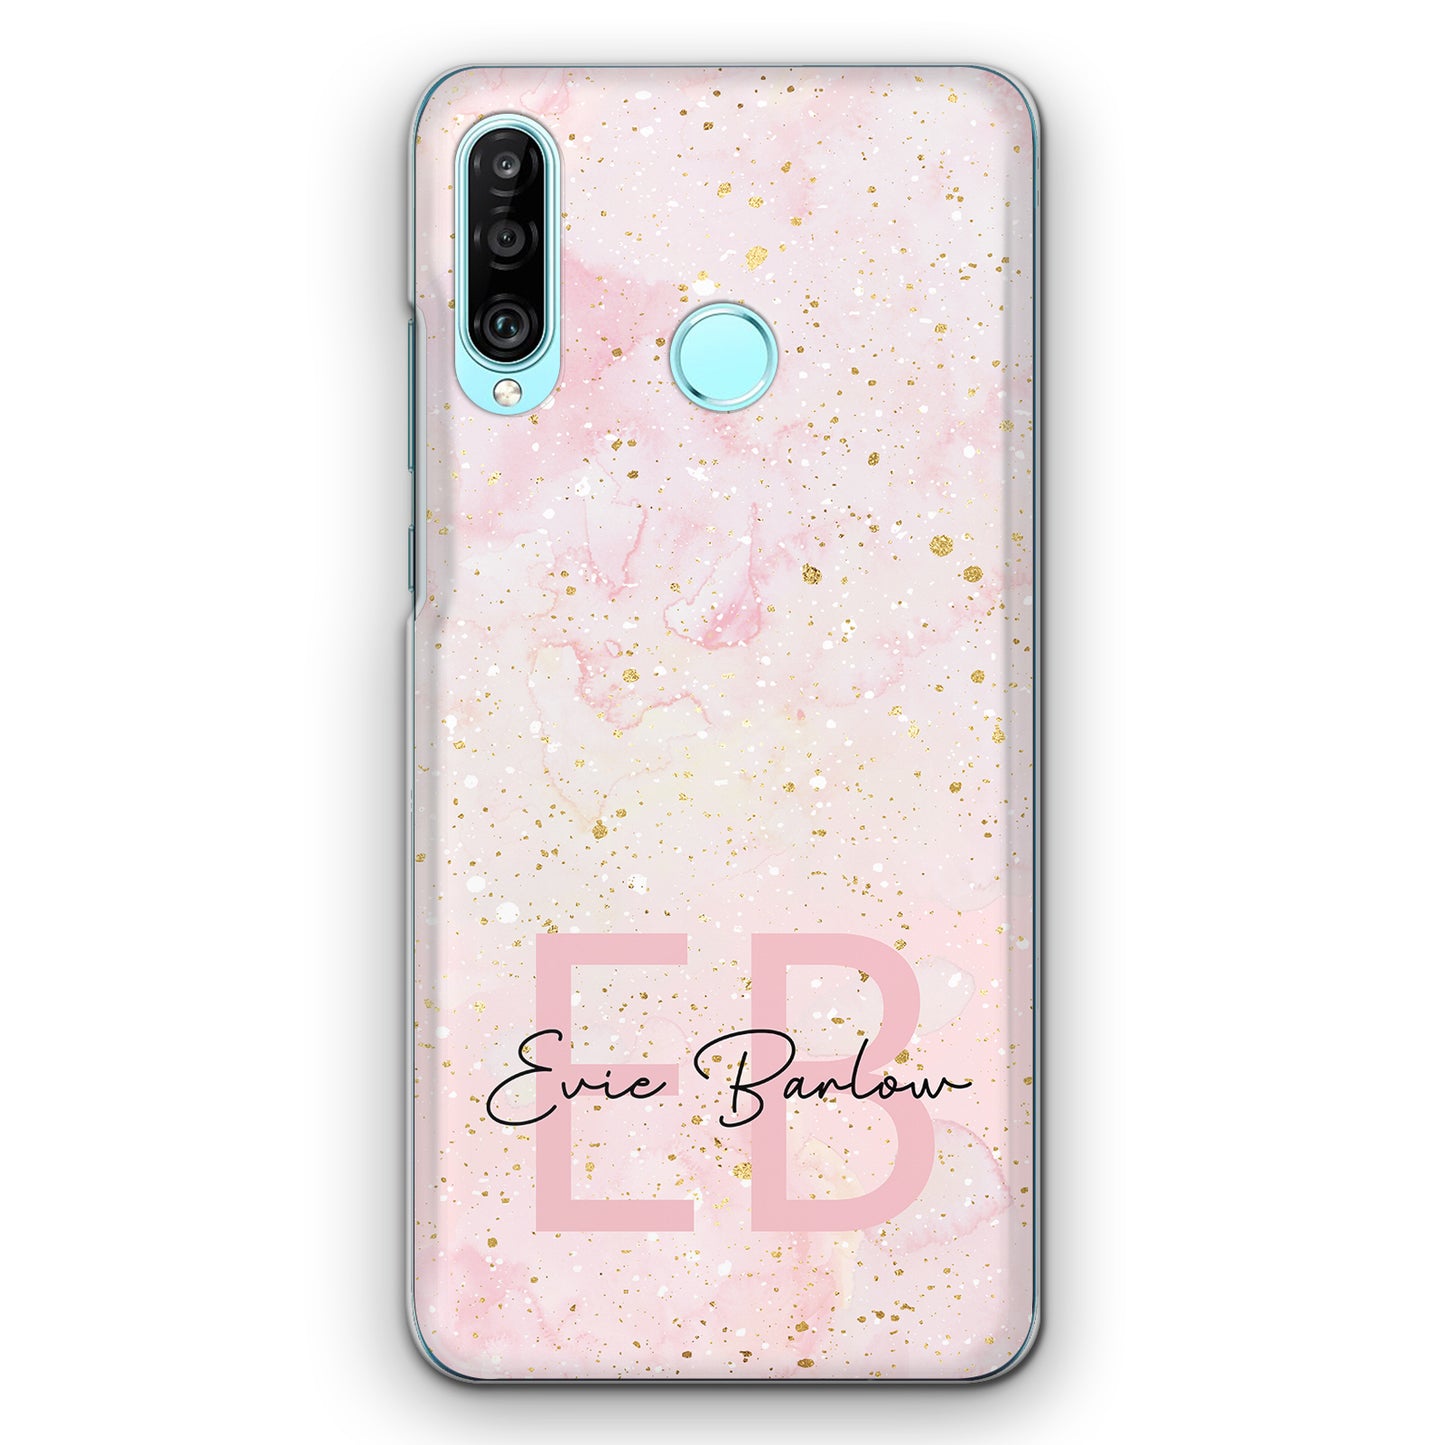 Personalised Motorola Phone Hard Case with Soft Monogram and Name on Baby Pink Marble